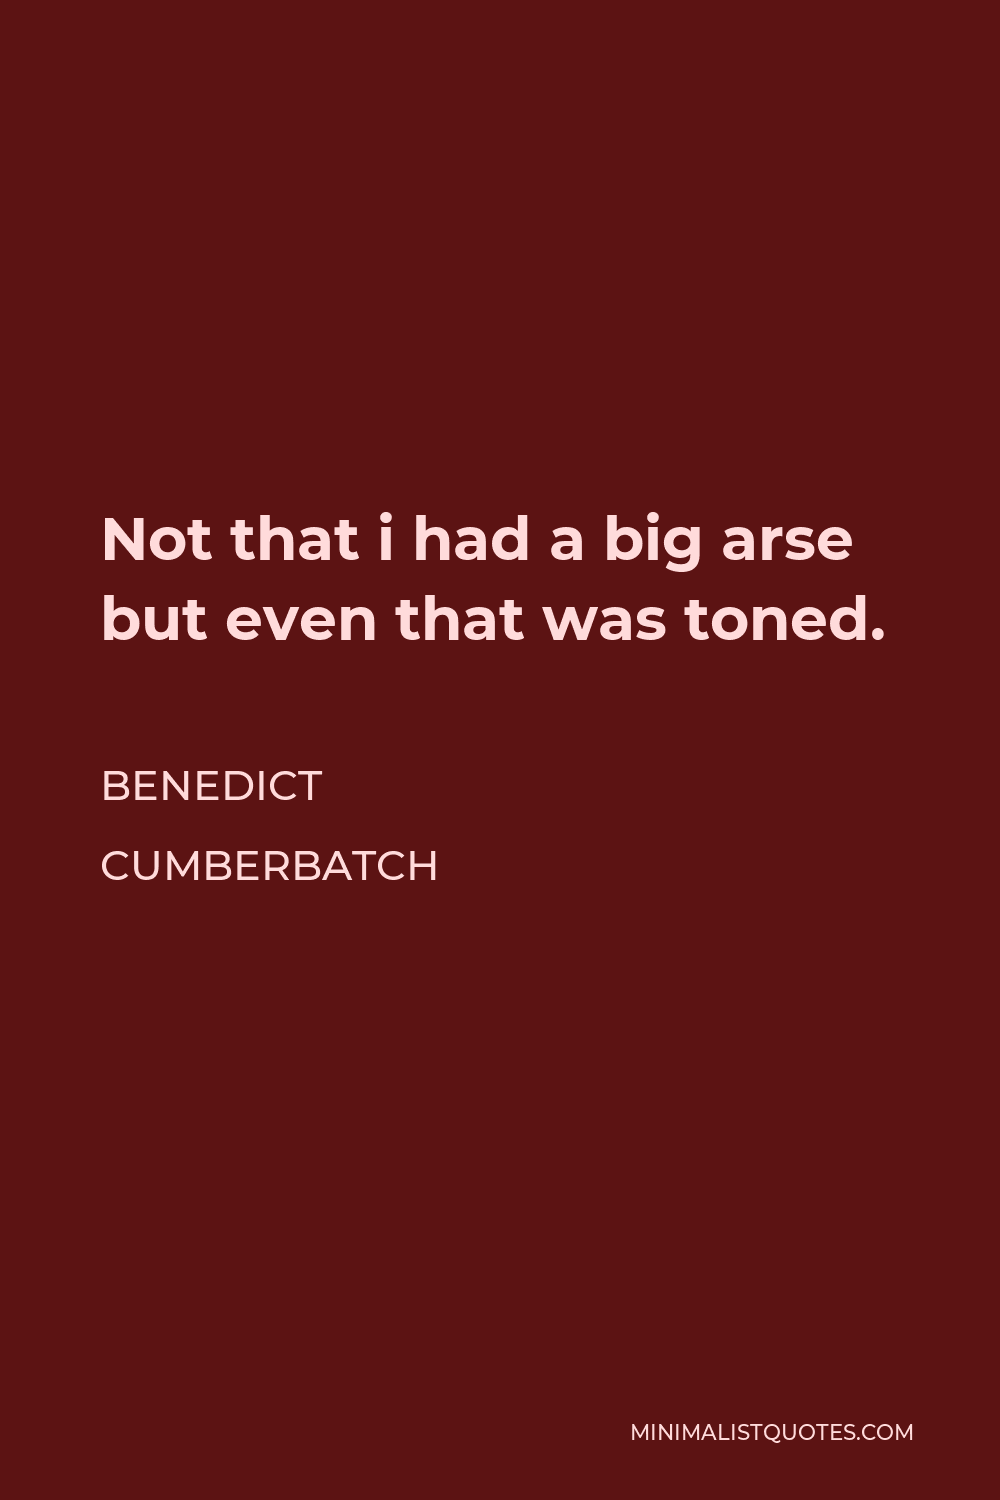 Benedict Cumberbatch Quote - Not that i had a big arse but even that was toned.